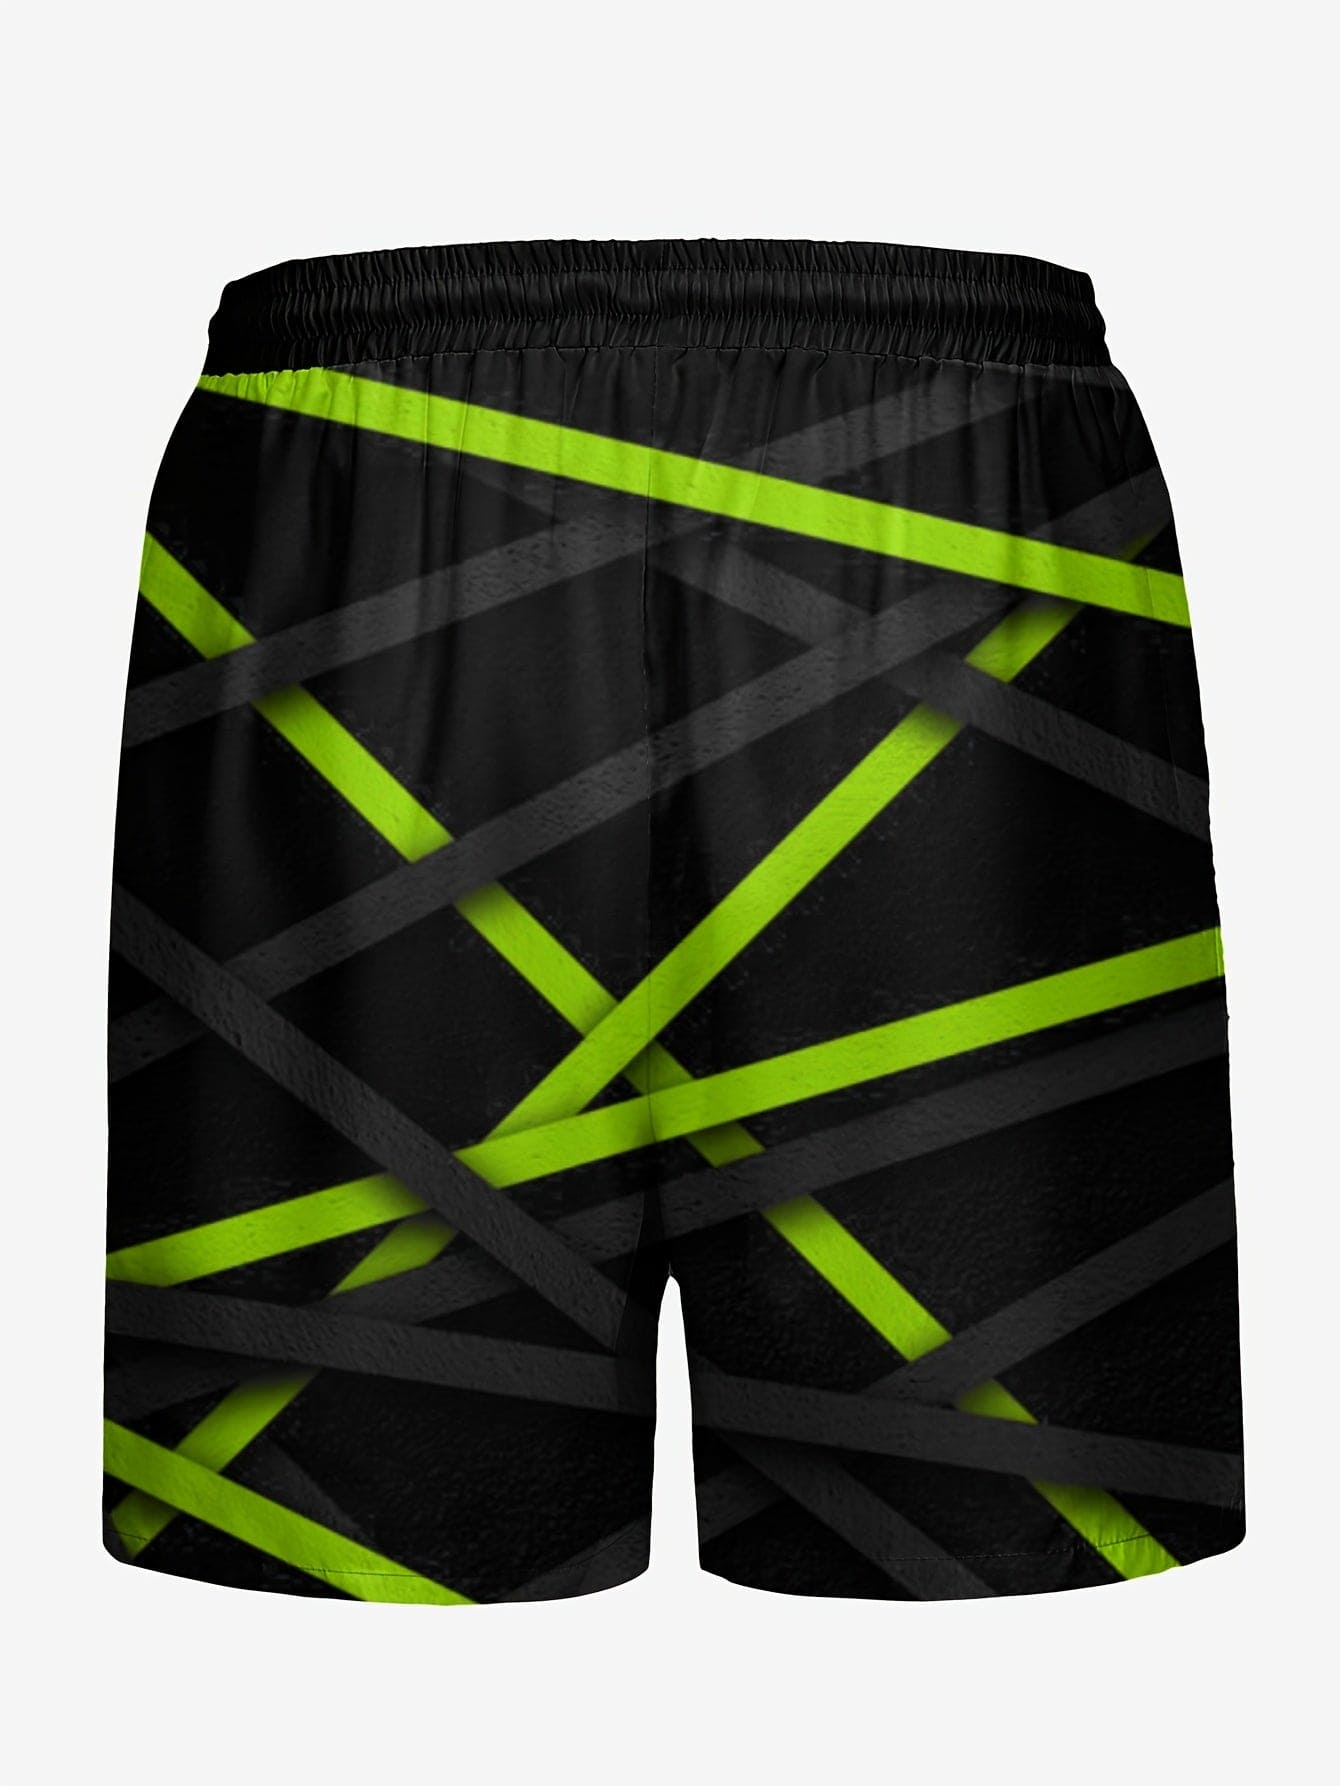 Men's Quick-drying Geometric Pattern Shorts for Summer Outdoor Sports